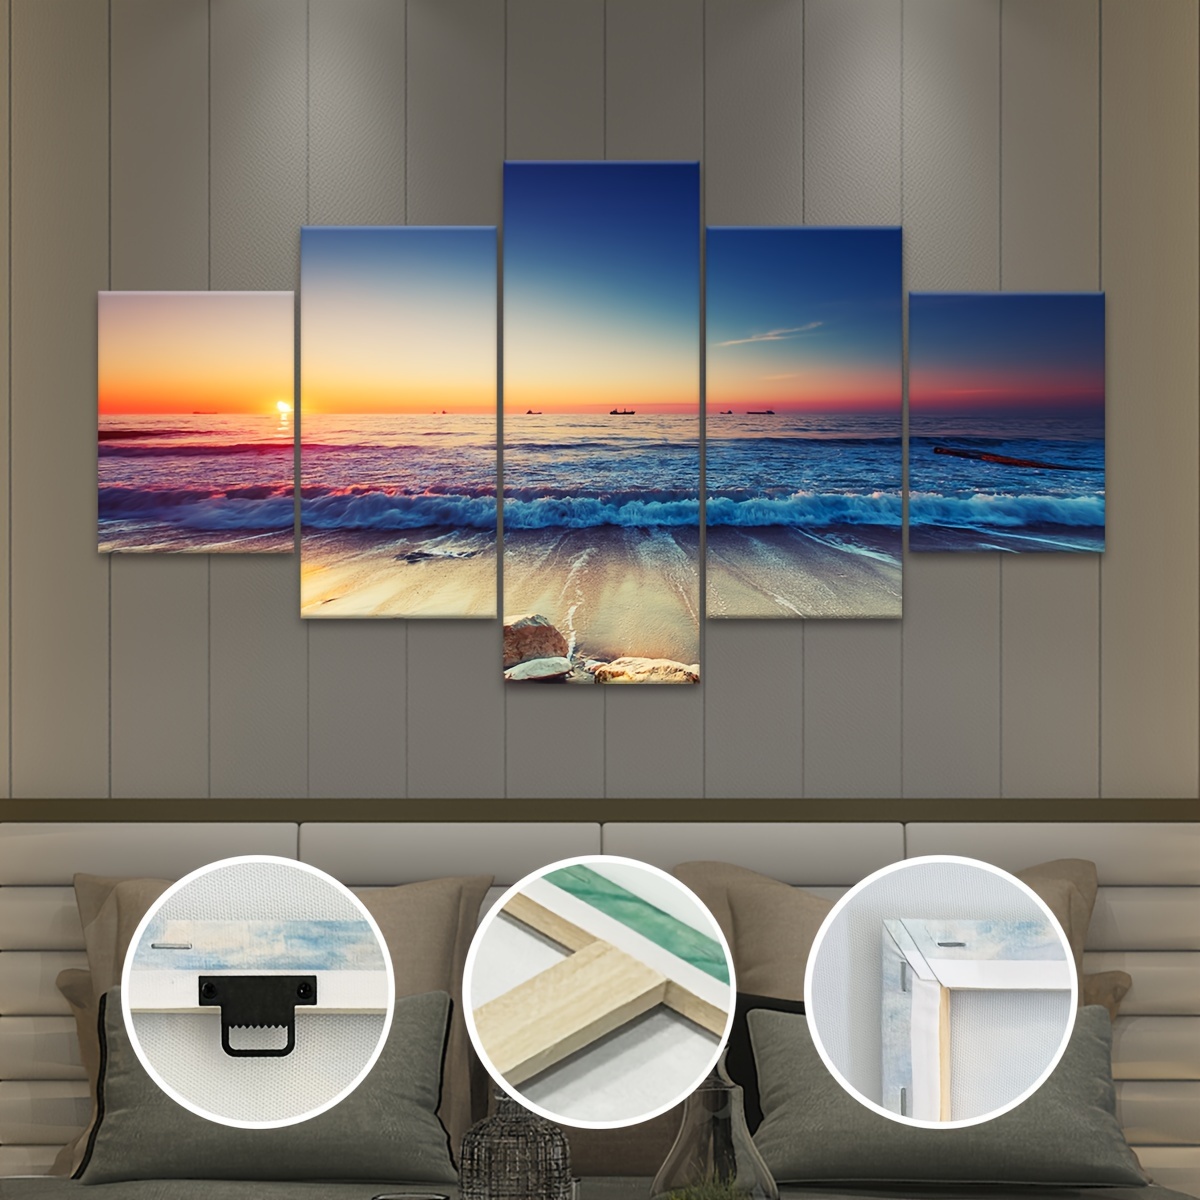 

5pcs Wooden Framed Canvas Poster, Modern Art, Sunset Sea View Canvas Poster, Ideal Gift For Bedroom Living Room Corridor, Wall Art, Wall Decor, Winter Decor, Room Decoration